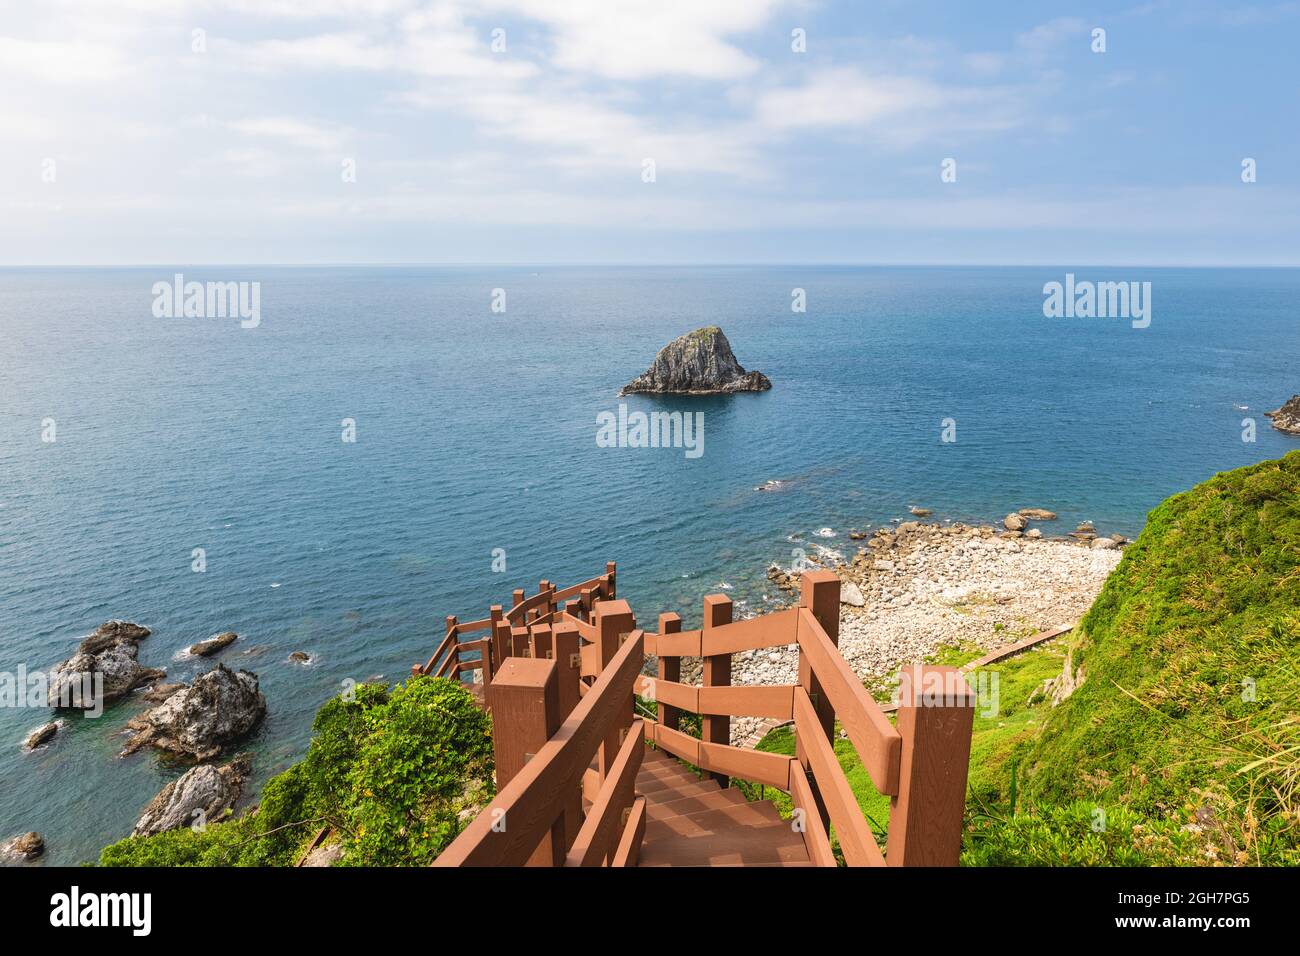 scenery from the top of keelung islet at north taiwan Stock Photo